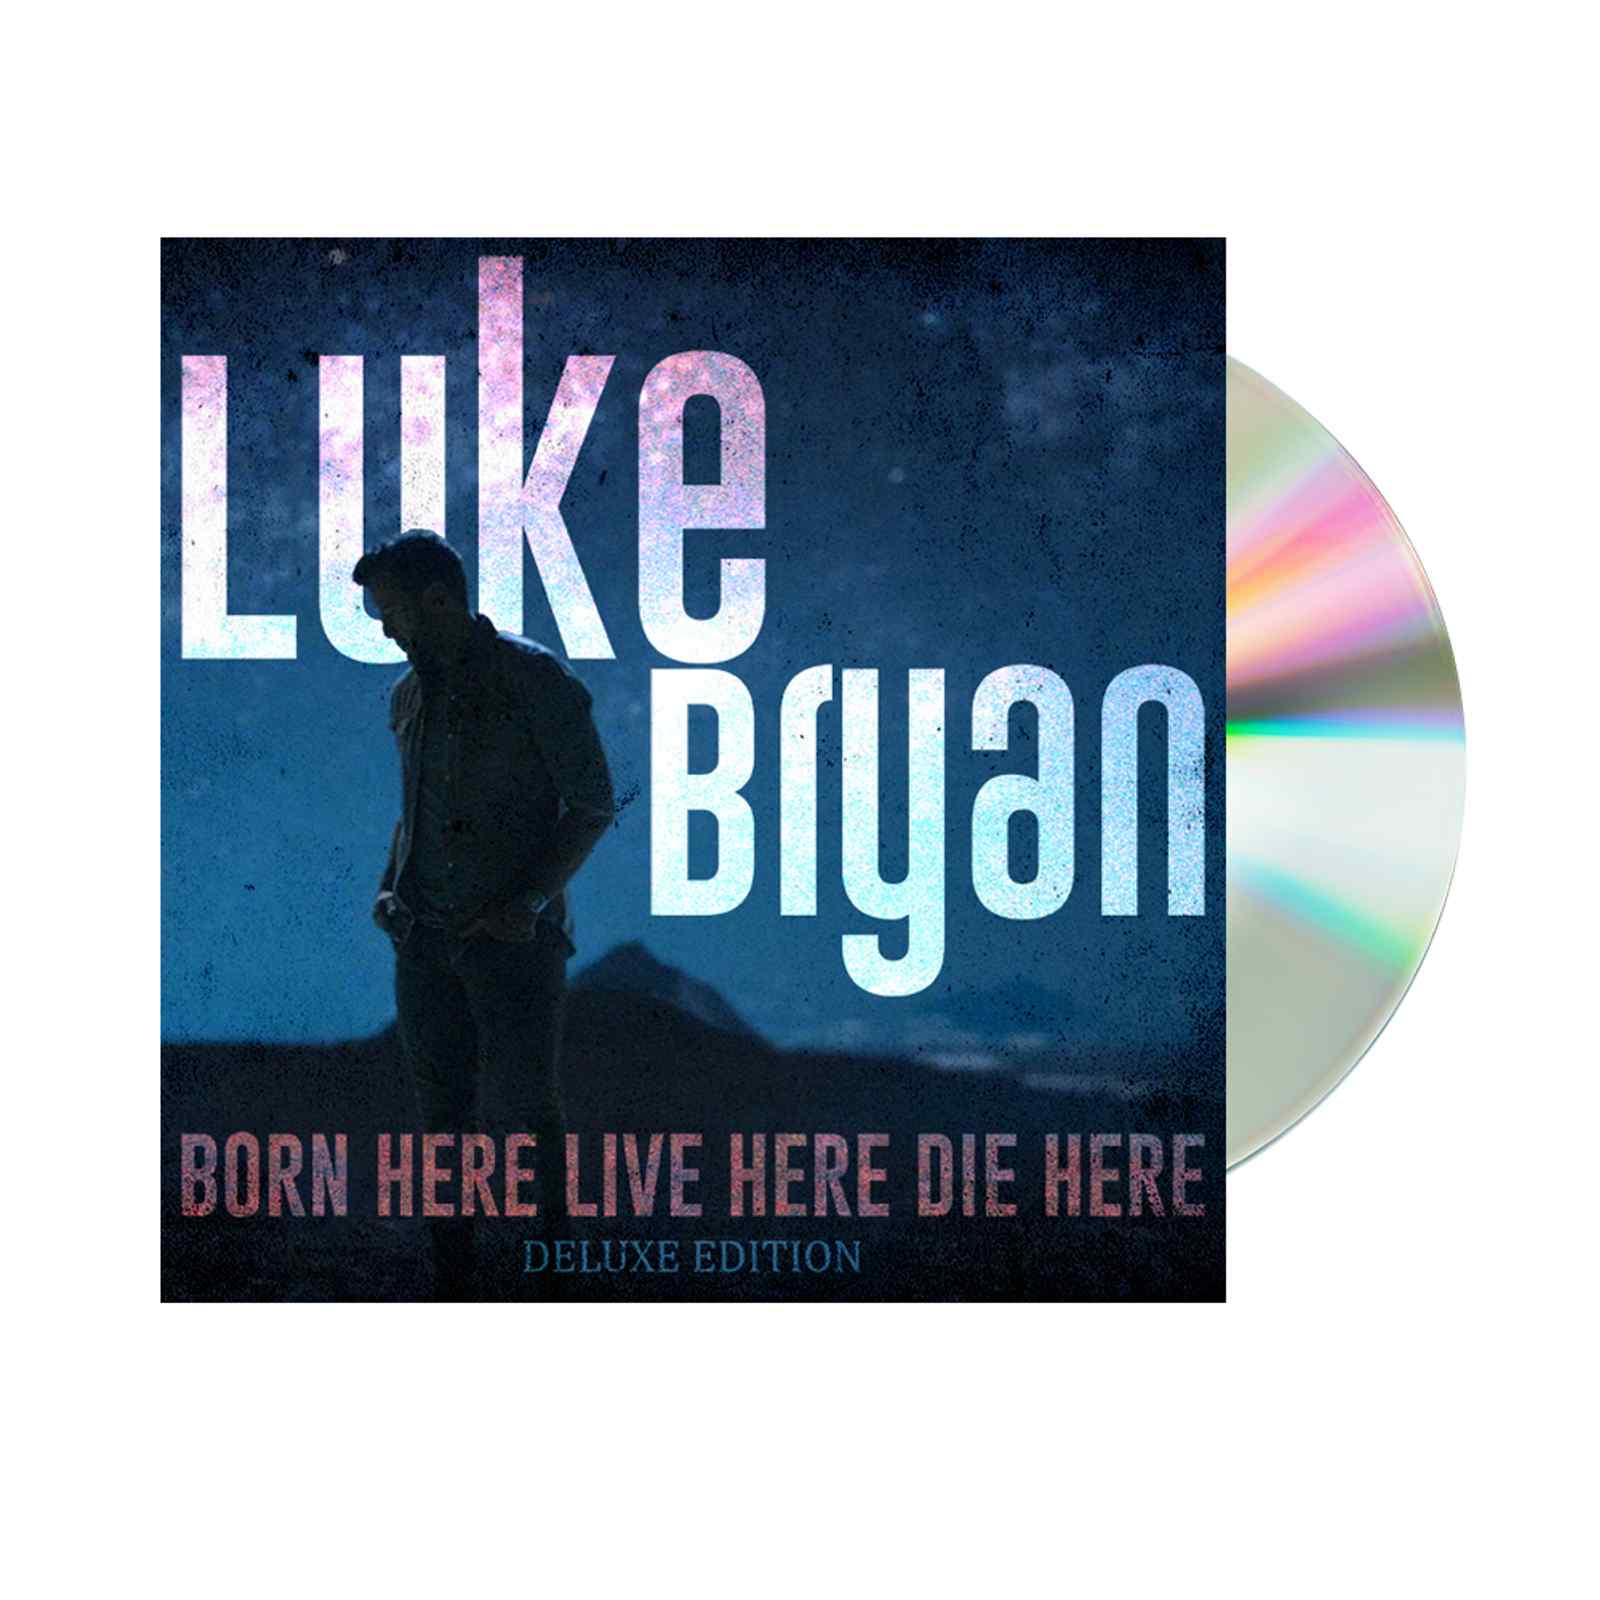 Born Here Live Here Die Here Deluxe Edition CD